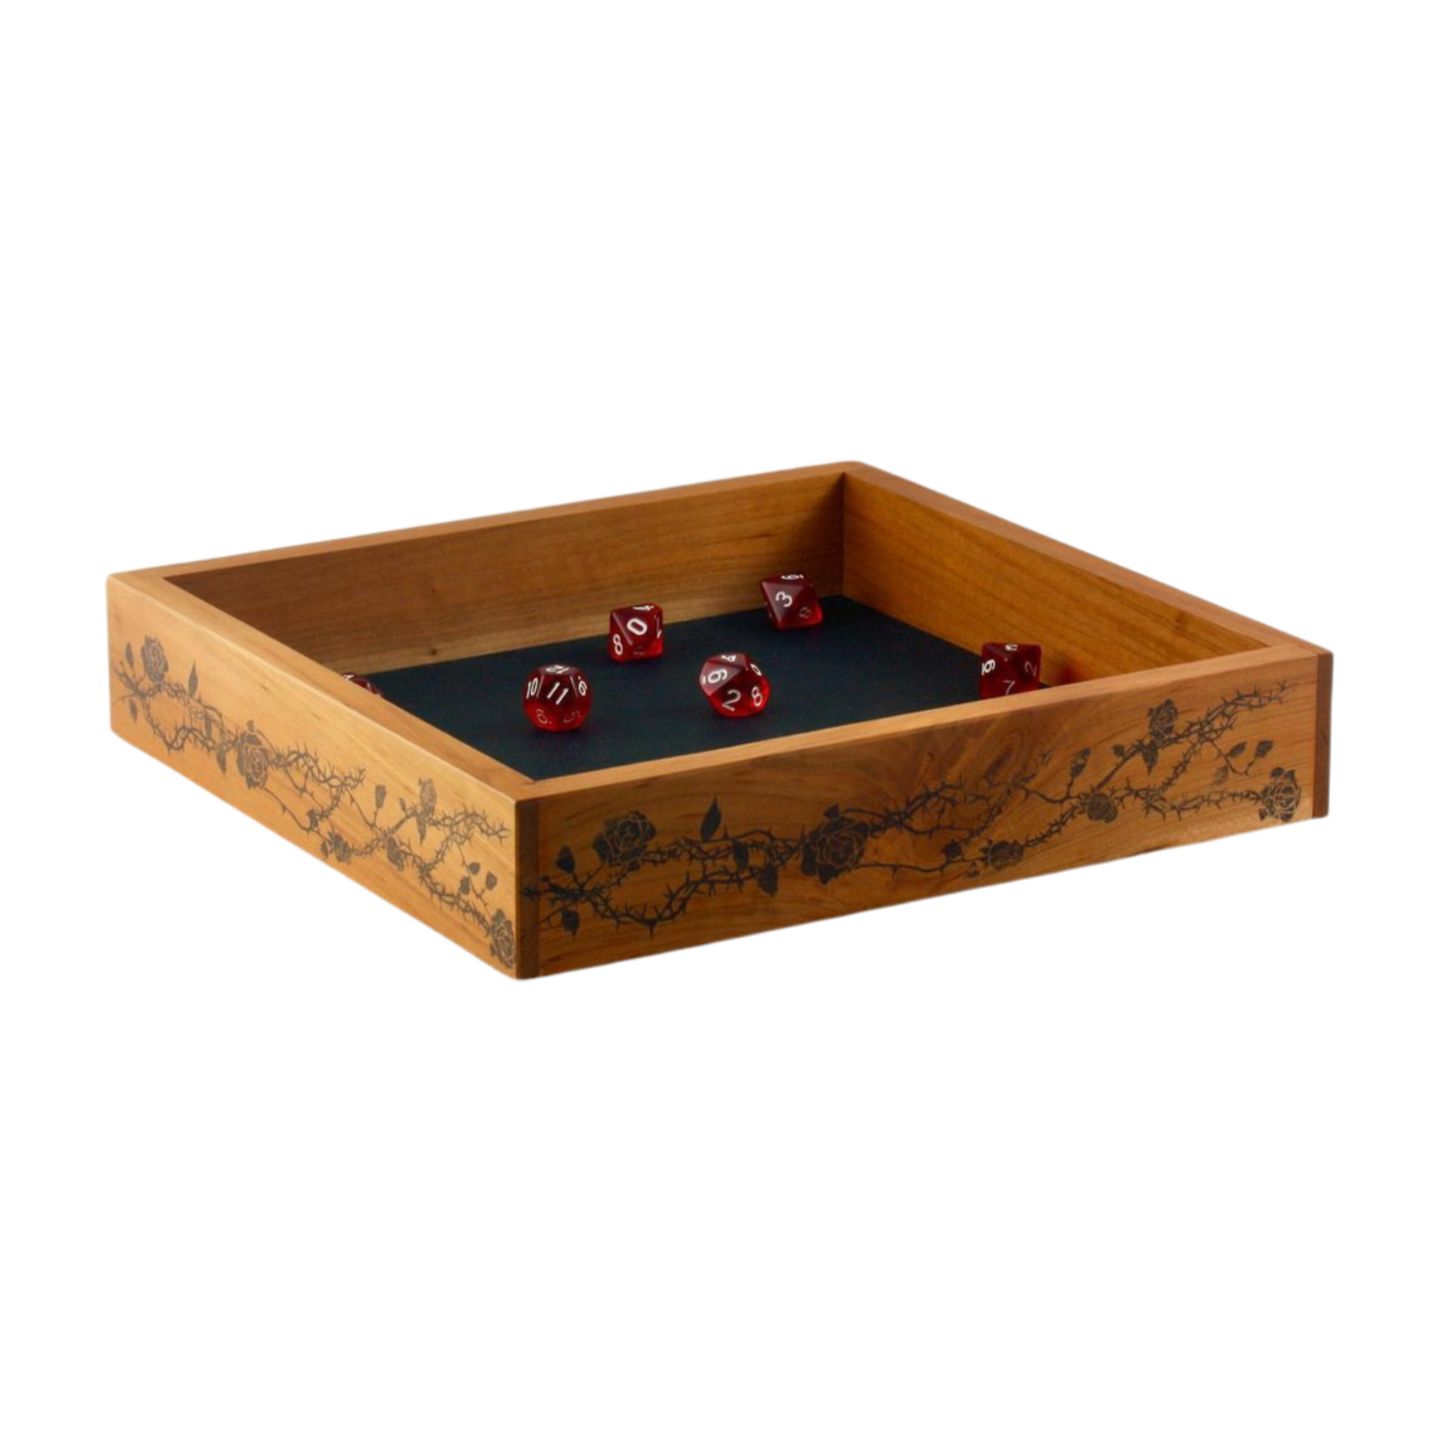 Large Wood Rose and Thorn Dice Tray with red dice and black leather rolling surface